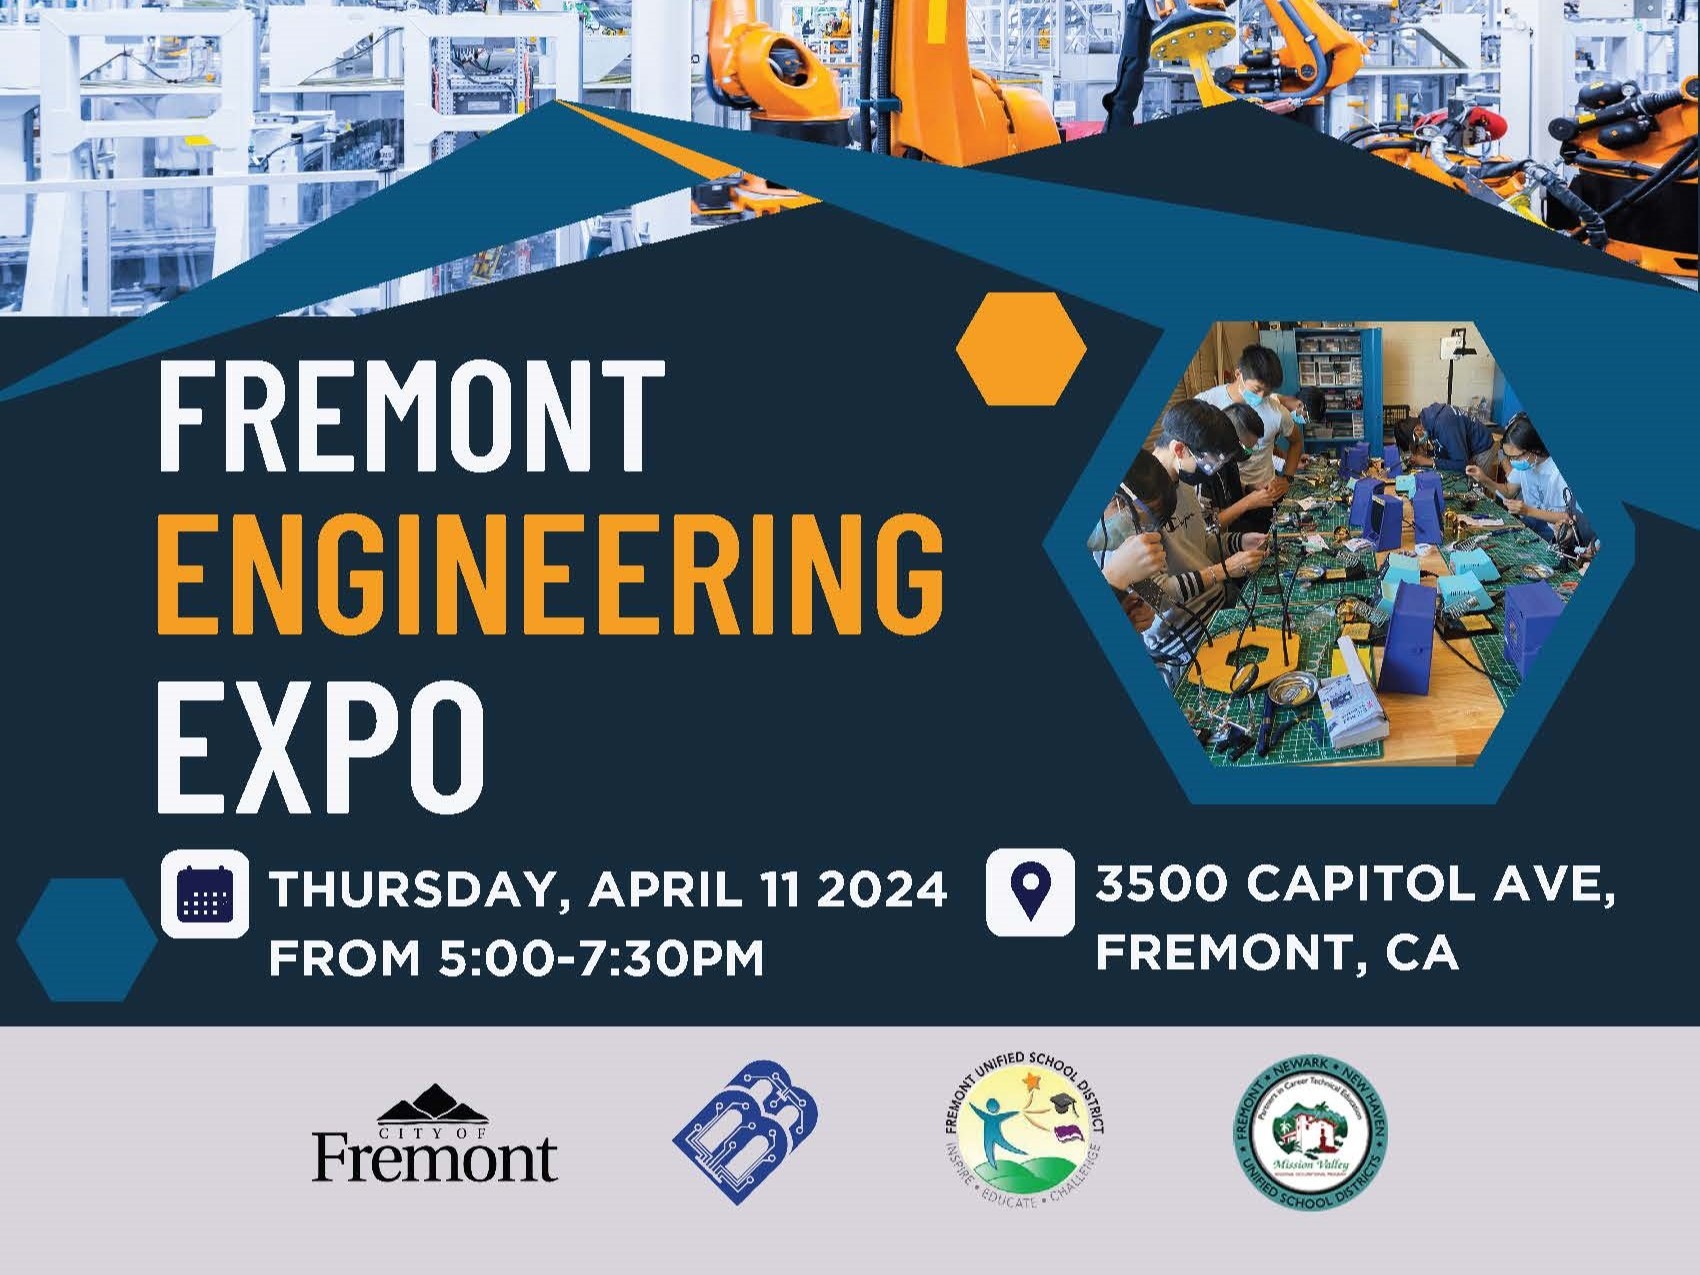 Fremont Engineering Expo, April 11